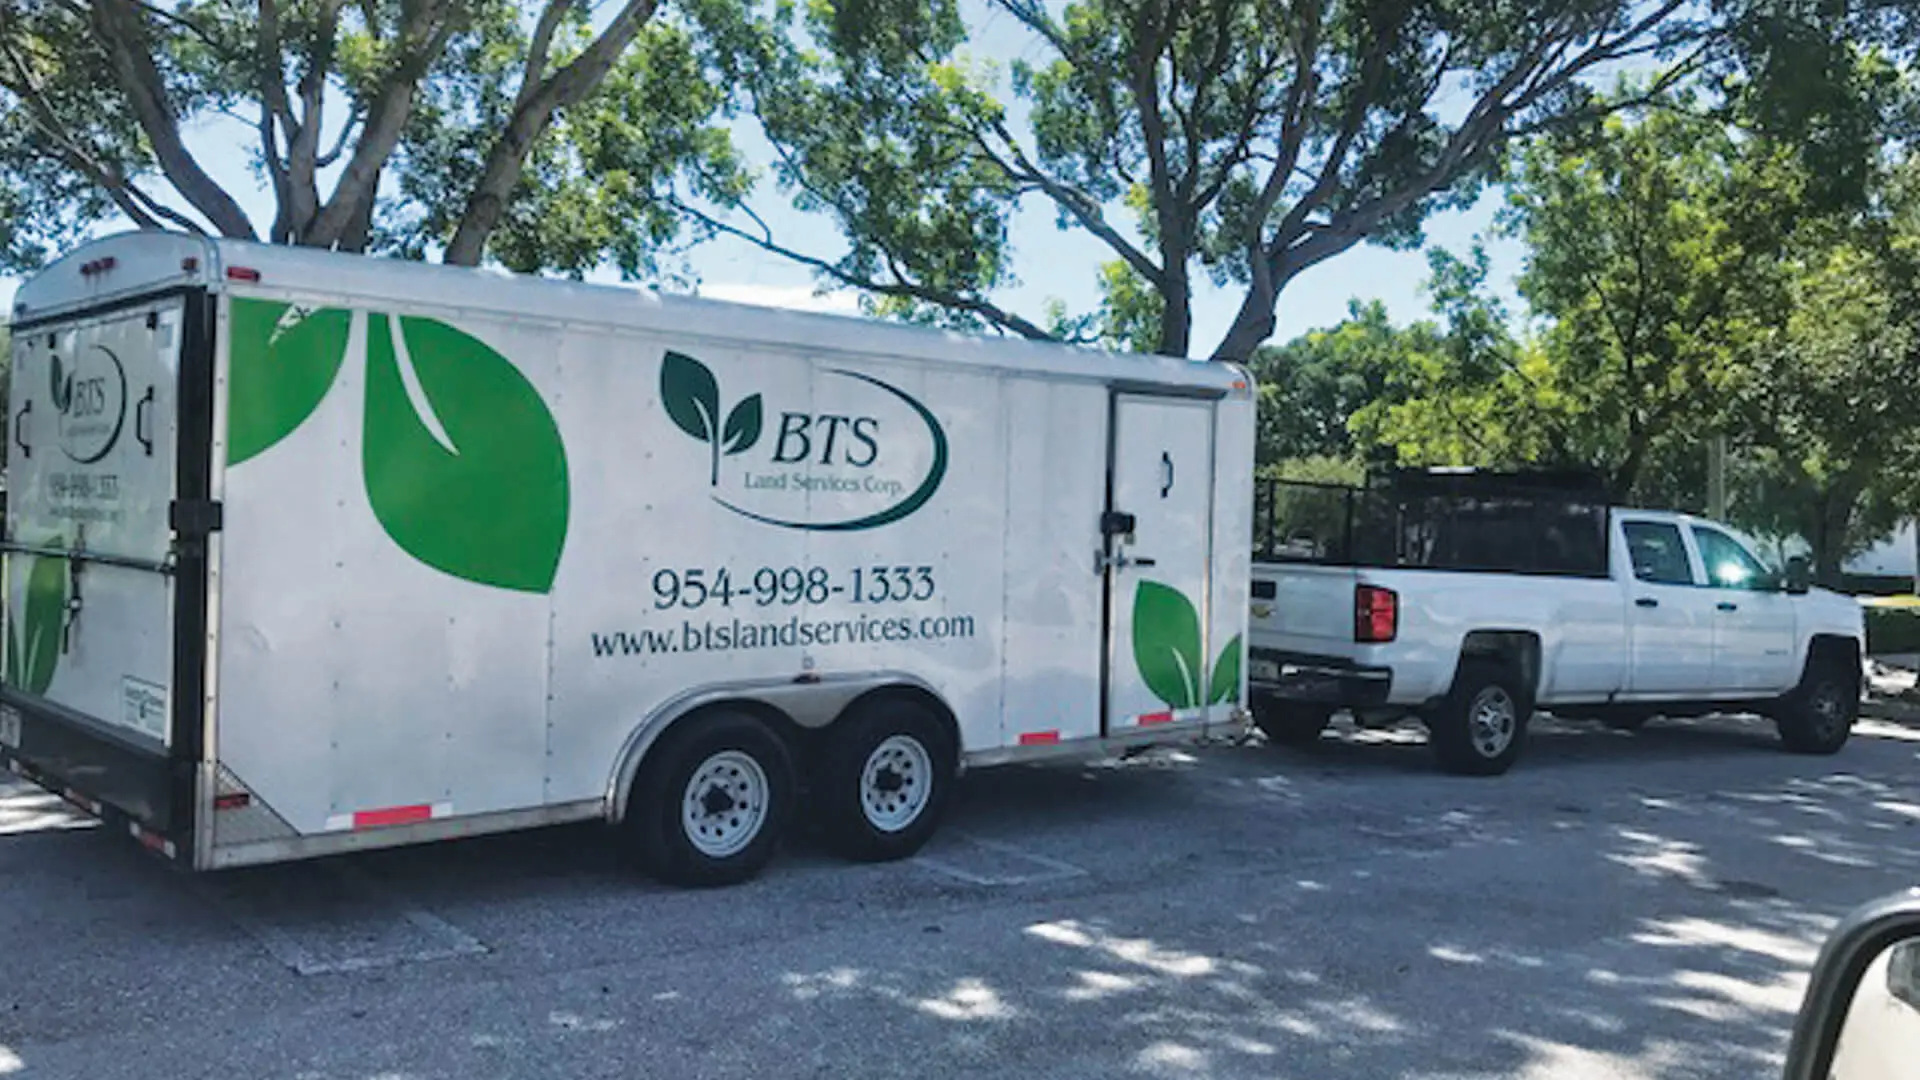 BTS Land Services Corp truck and trailer for commercial lawn and landscaping services.